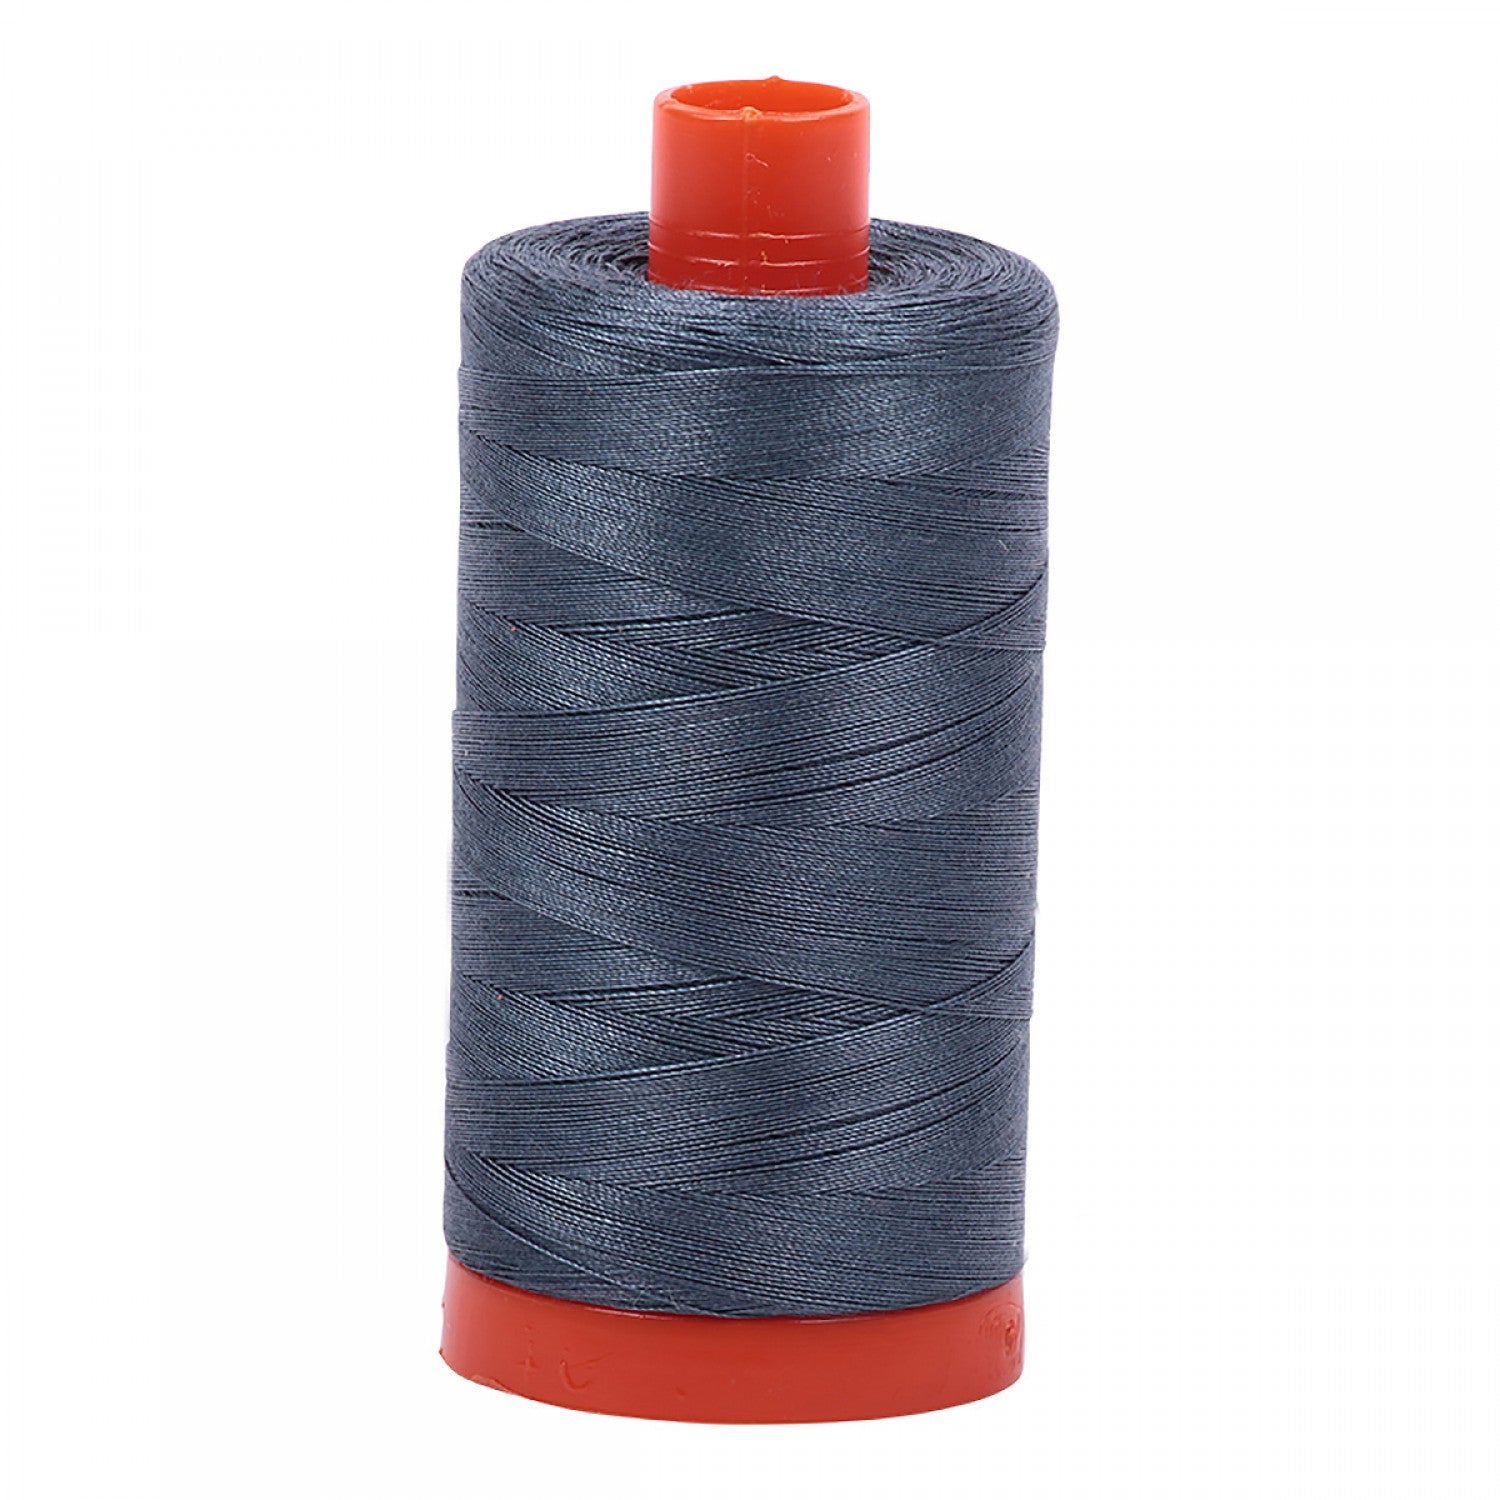 Aurifil 50 wt Sewing and Quilting Thread 100% cotton 1,422 yds